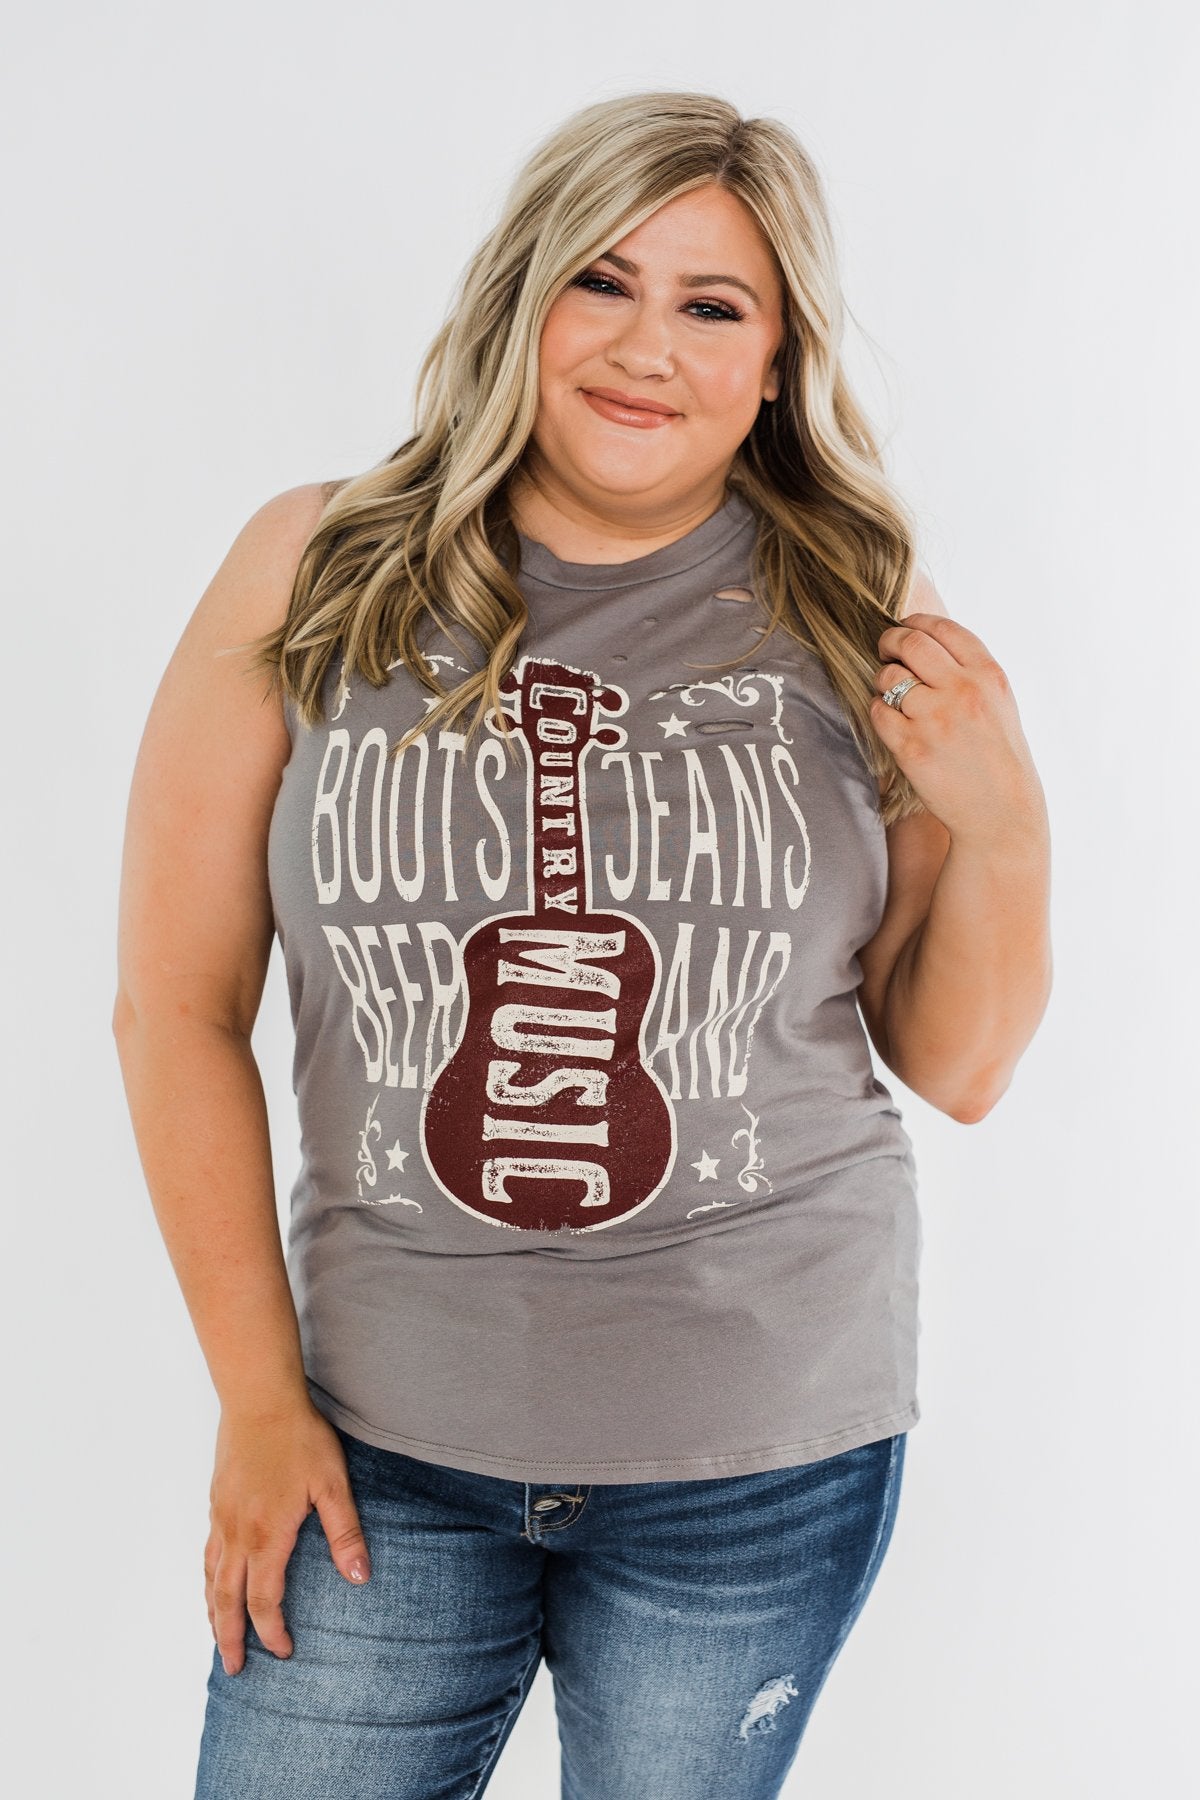 "Boots, Jeans, Beer, & Country Music" Graphic Tank Top- Charcoal